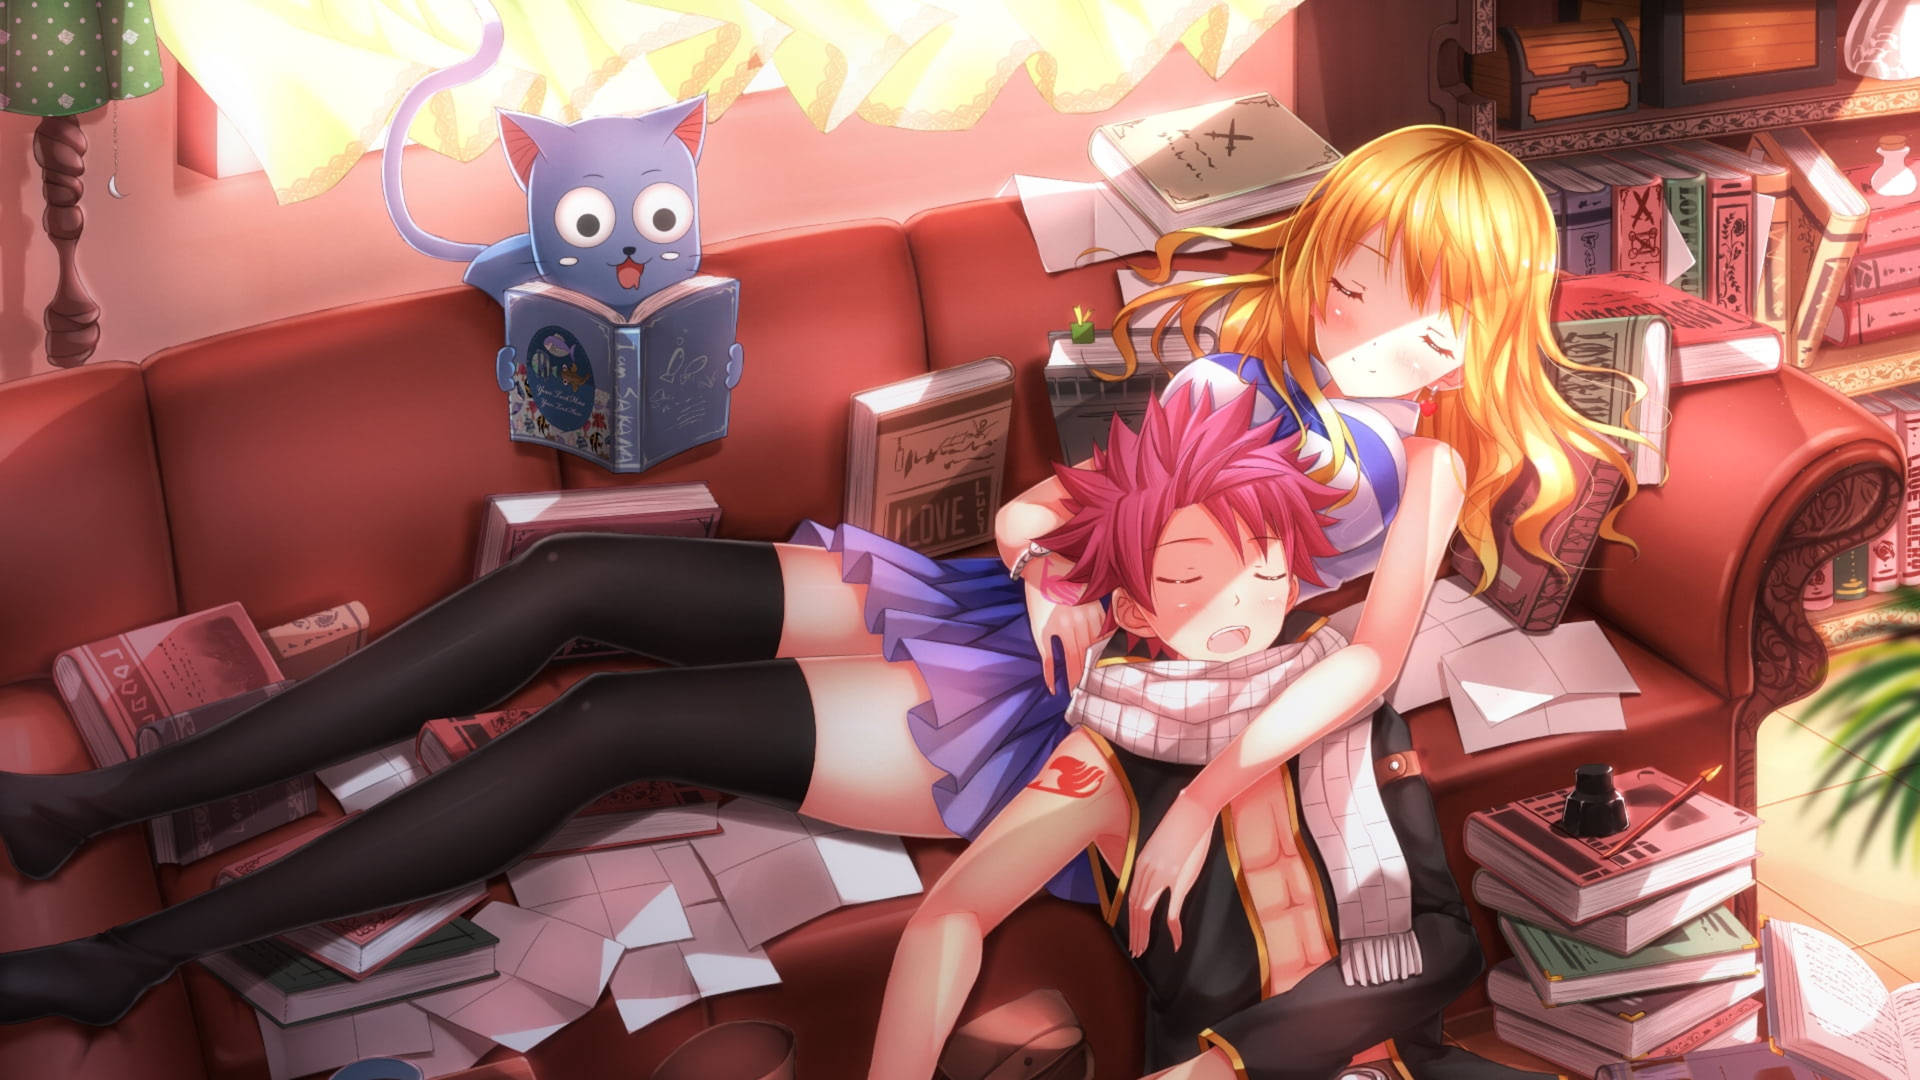 Download Cute Anime Couple Sleeping On Couch Wallpaper 